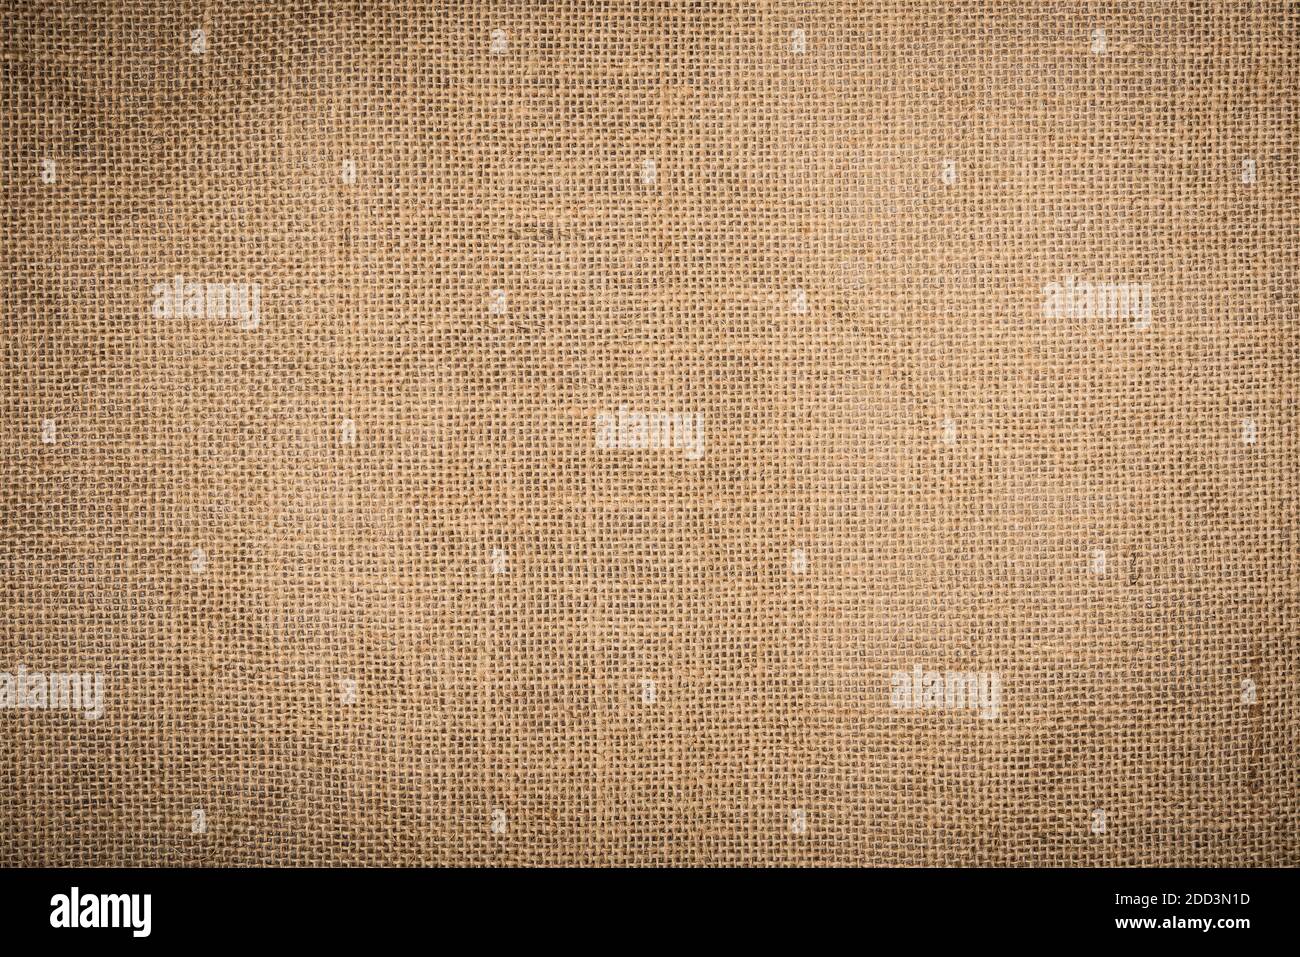 Rough brown hessian (burlap) cloth texture, for background Stock Photo